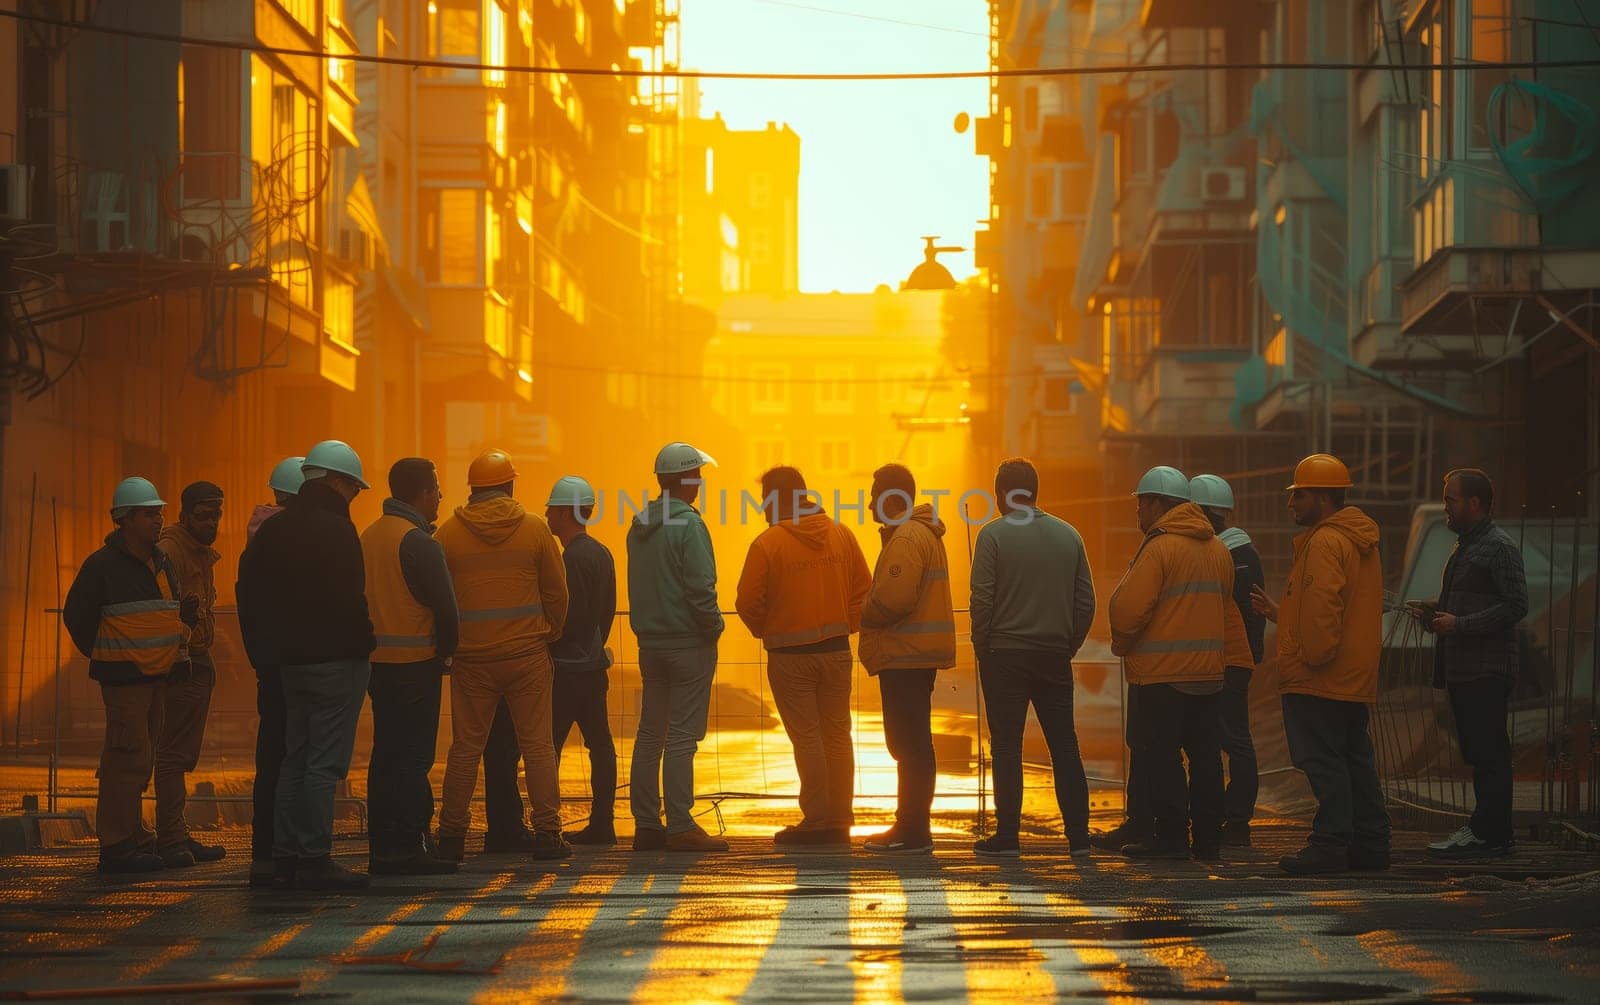 Construction workers on city street at evening sunset by richwolf